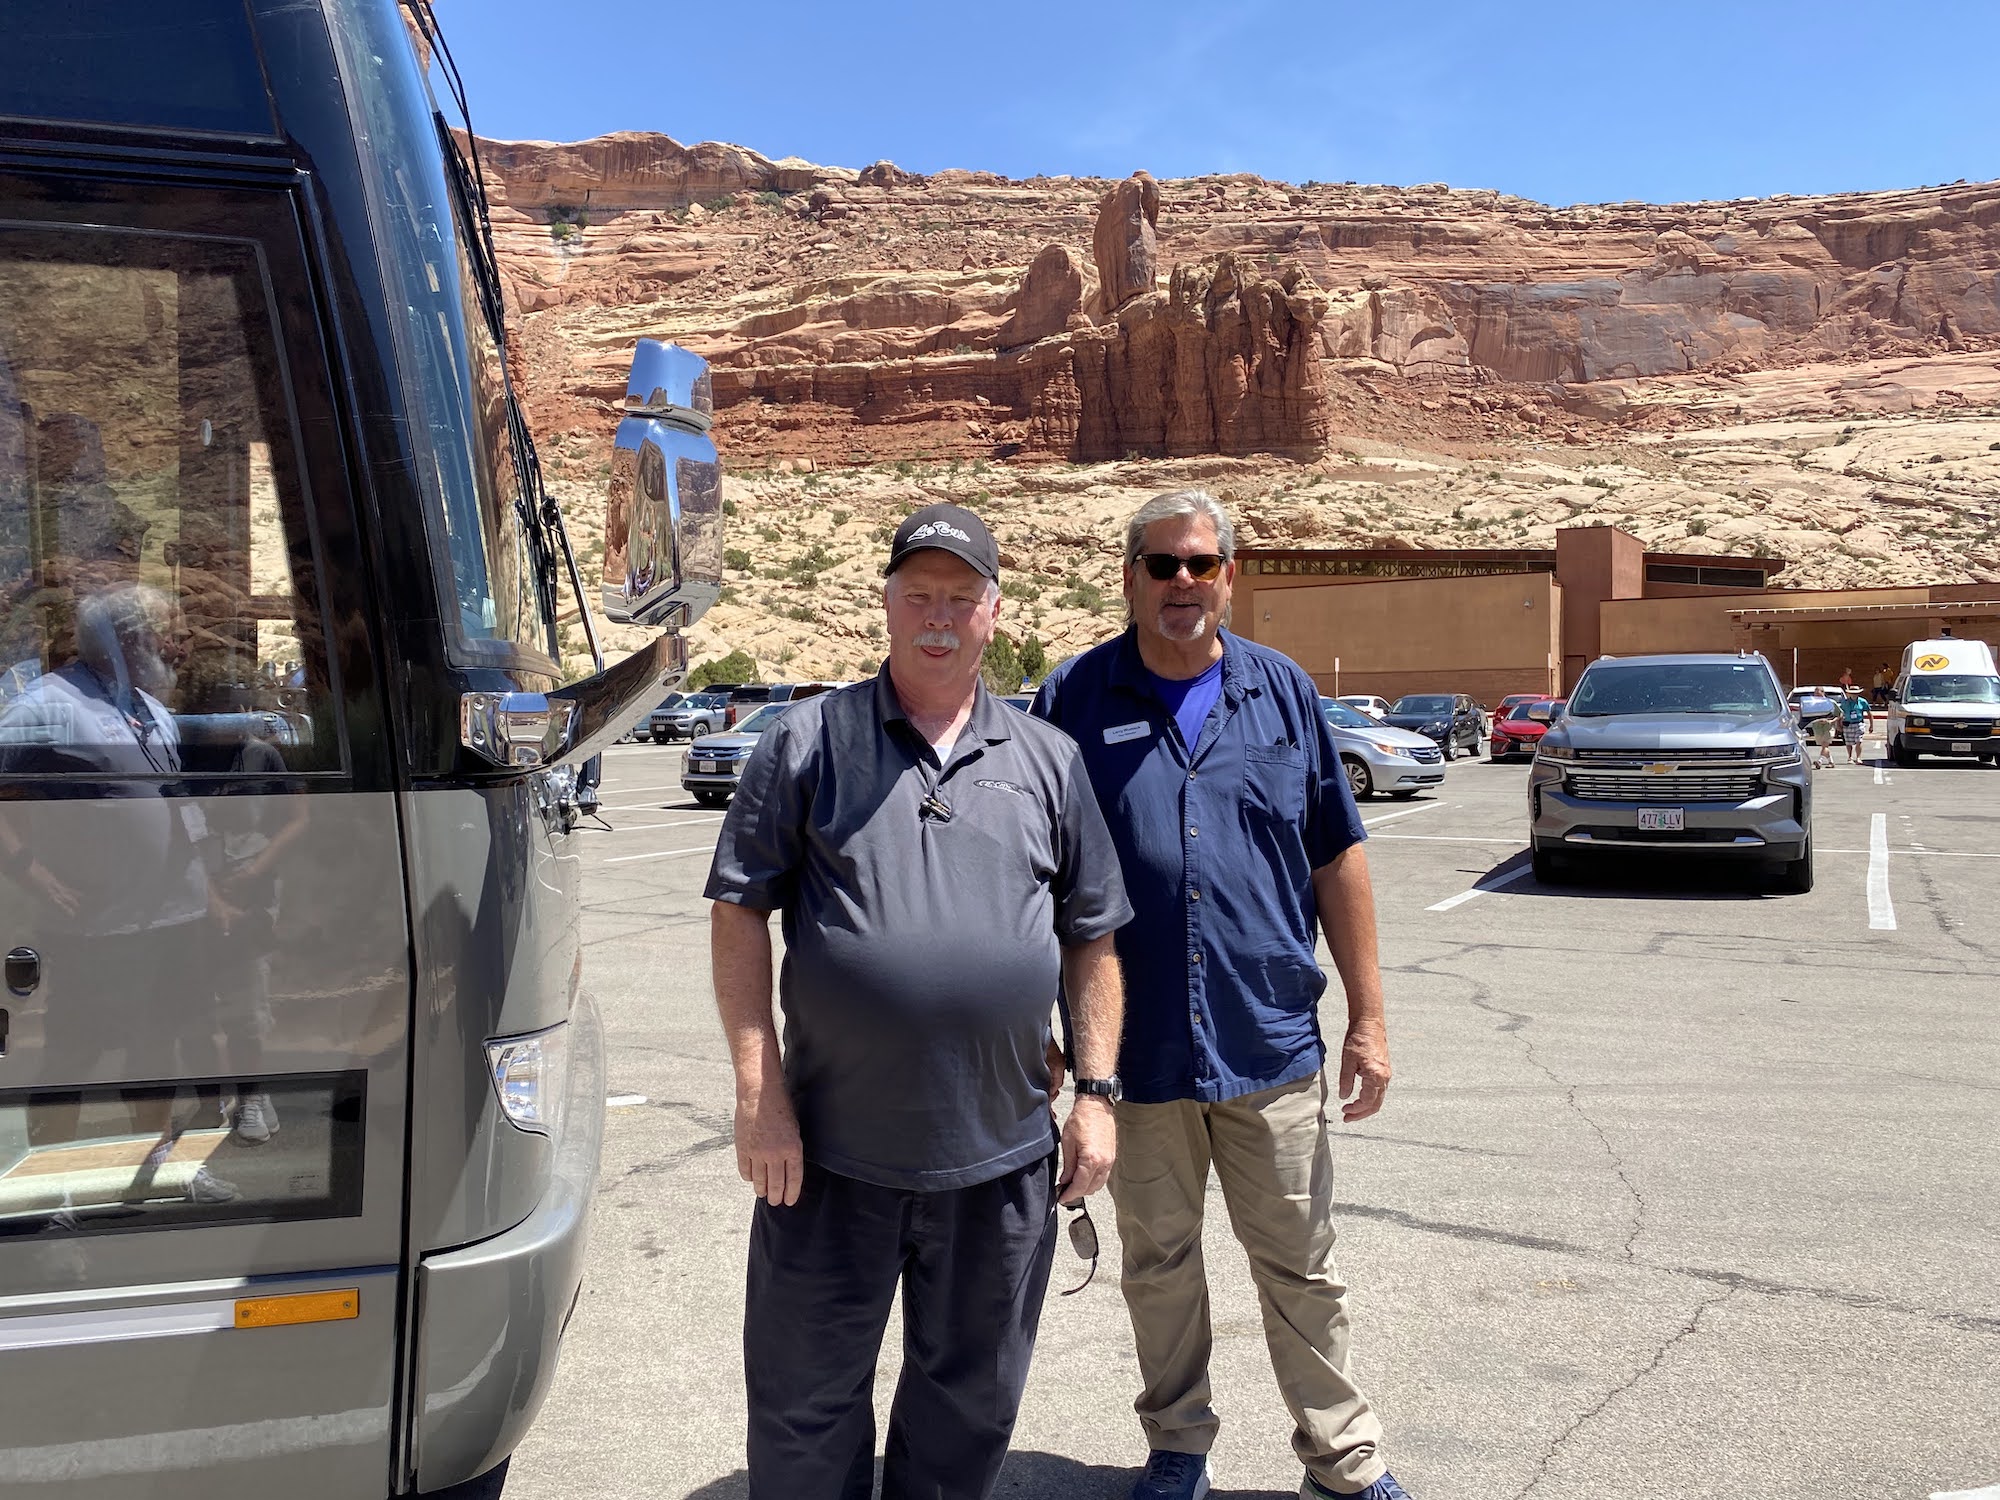 Our motocoach driver and tour guide beside the motor coach